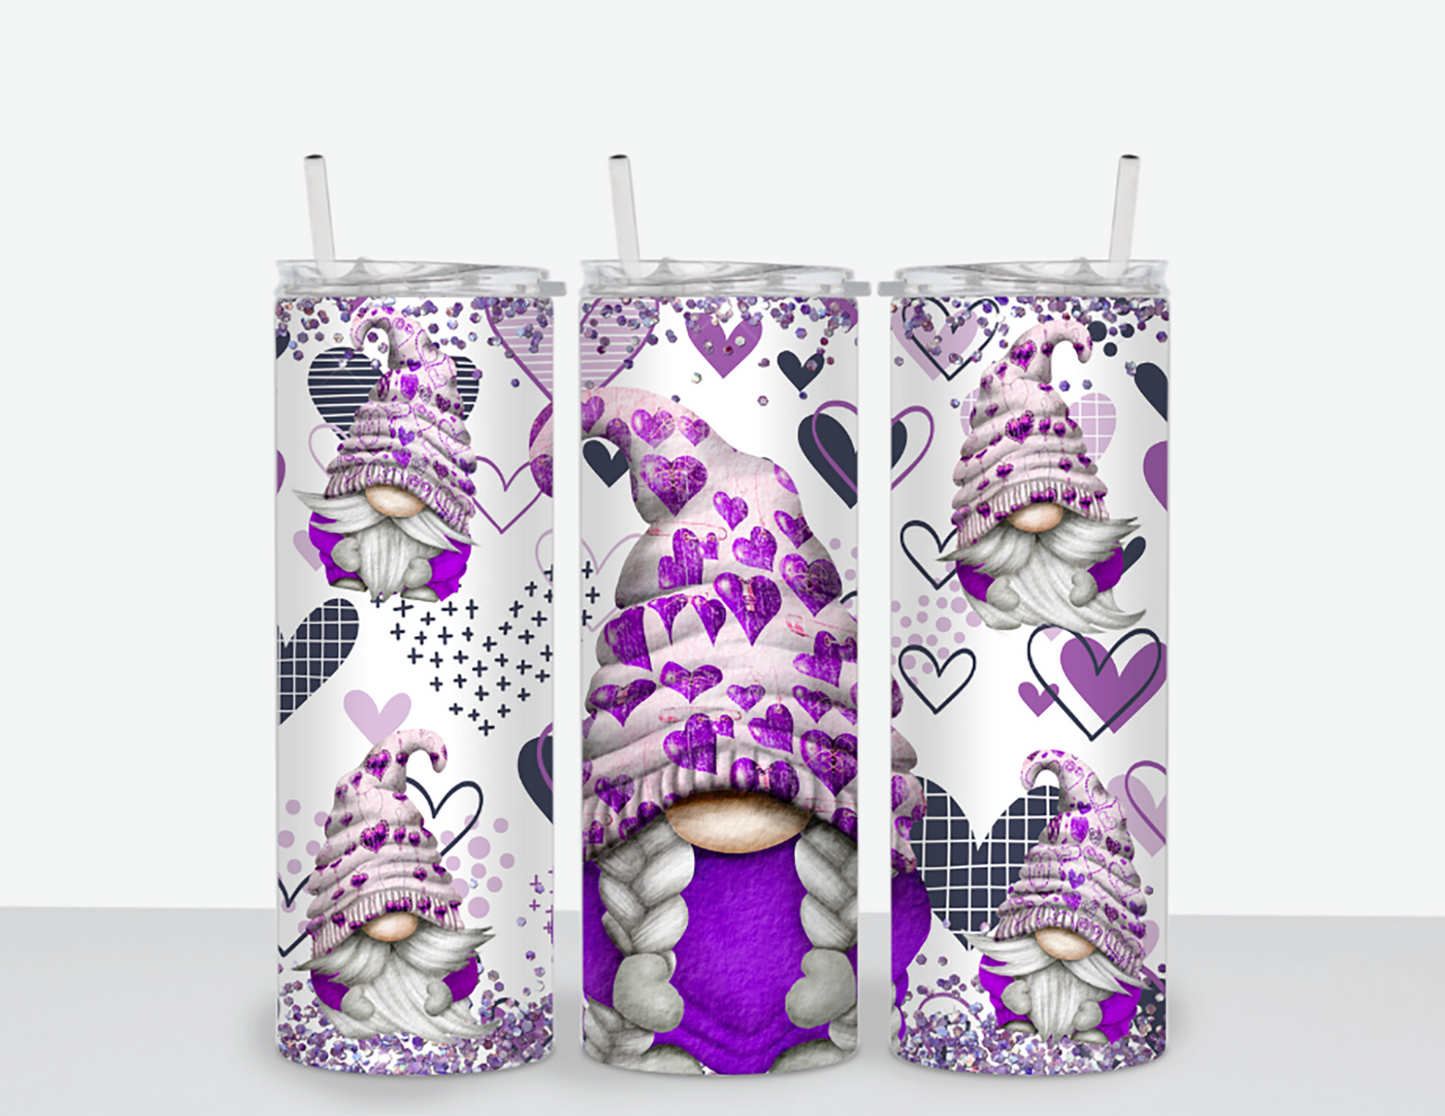 20 oz double wall insulated tumbler. Multiple designs available.